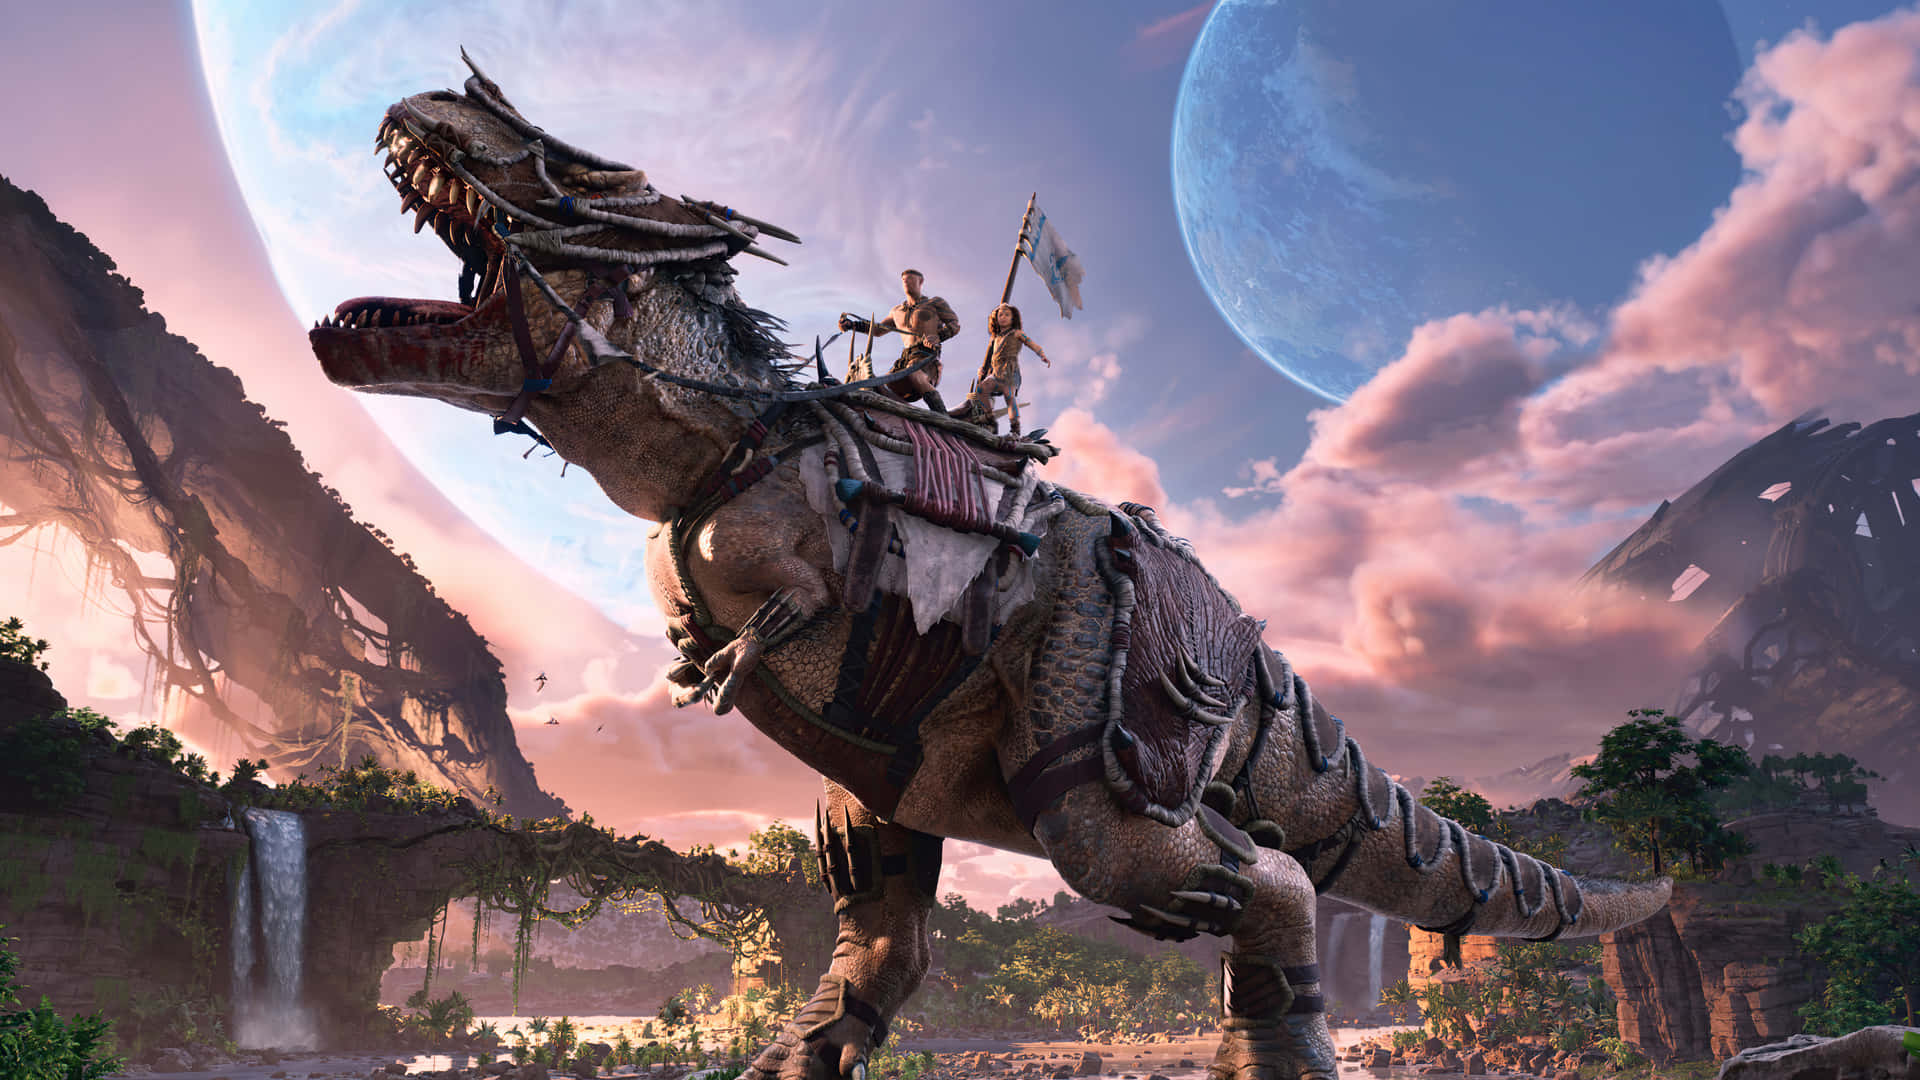 A Dinosaur Is Riding A Horse In A Fantasy World Wallpaper